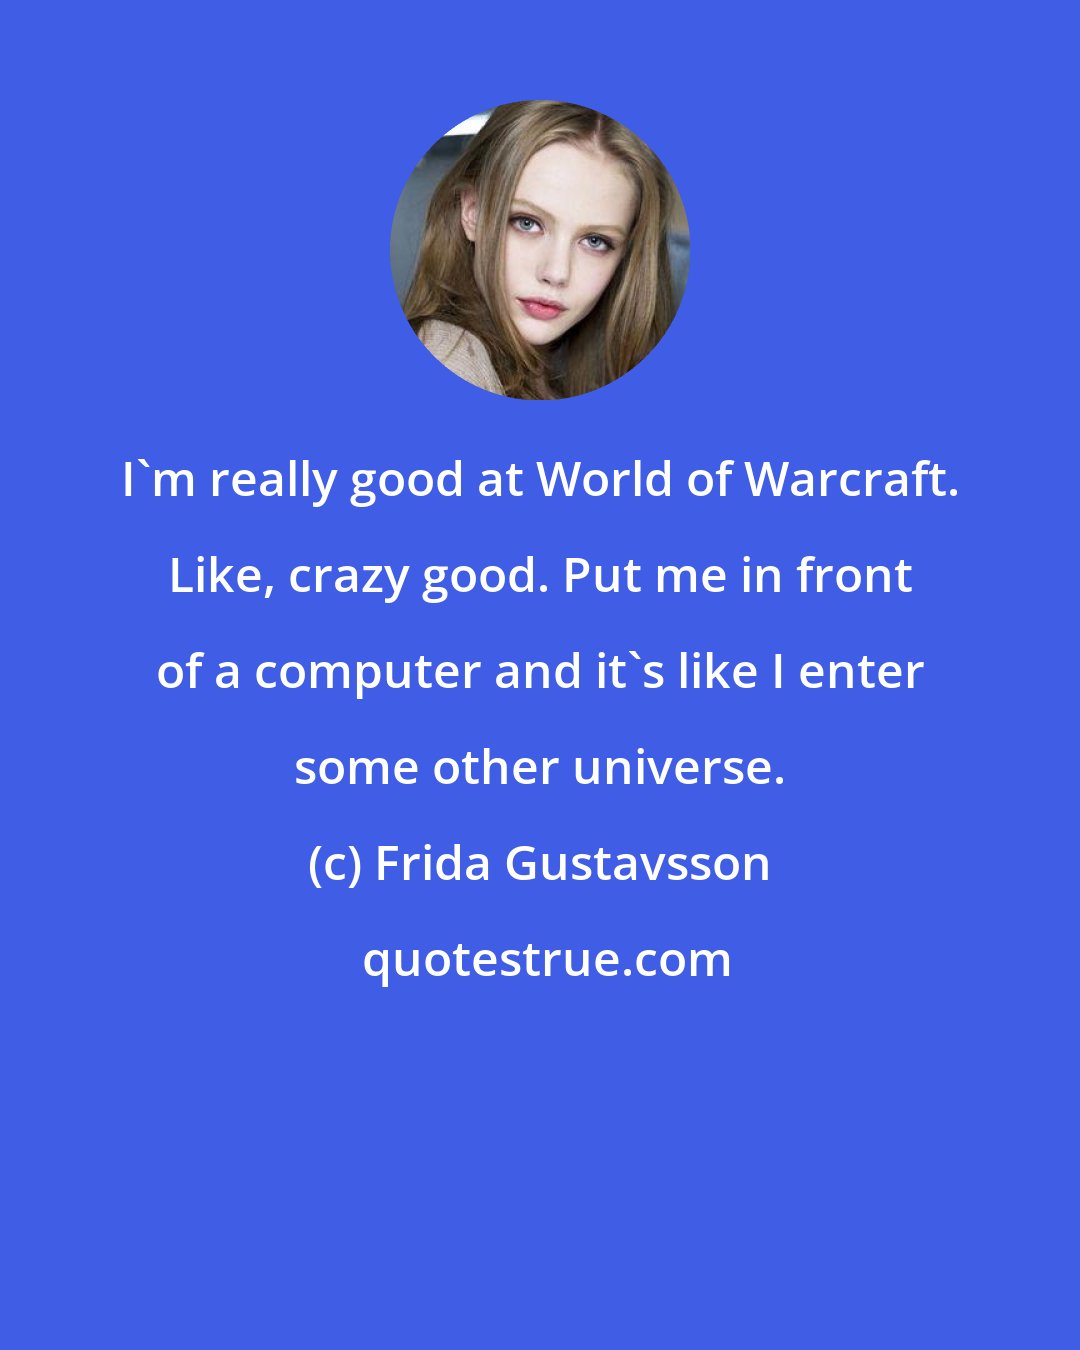 Frida Gustavsson: I'm really good at World of Warcraft. Like, crazy good. Put me in front of a computer and it's like I enter some other universe.